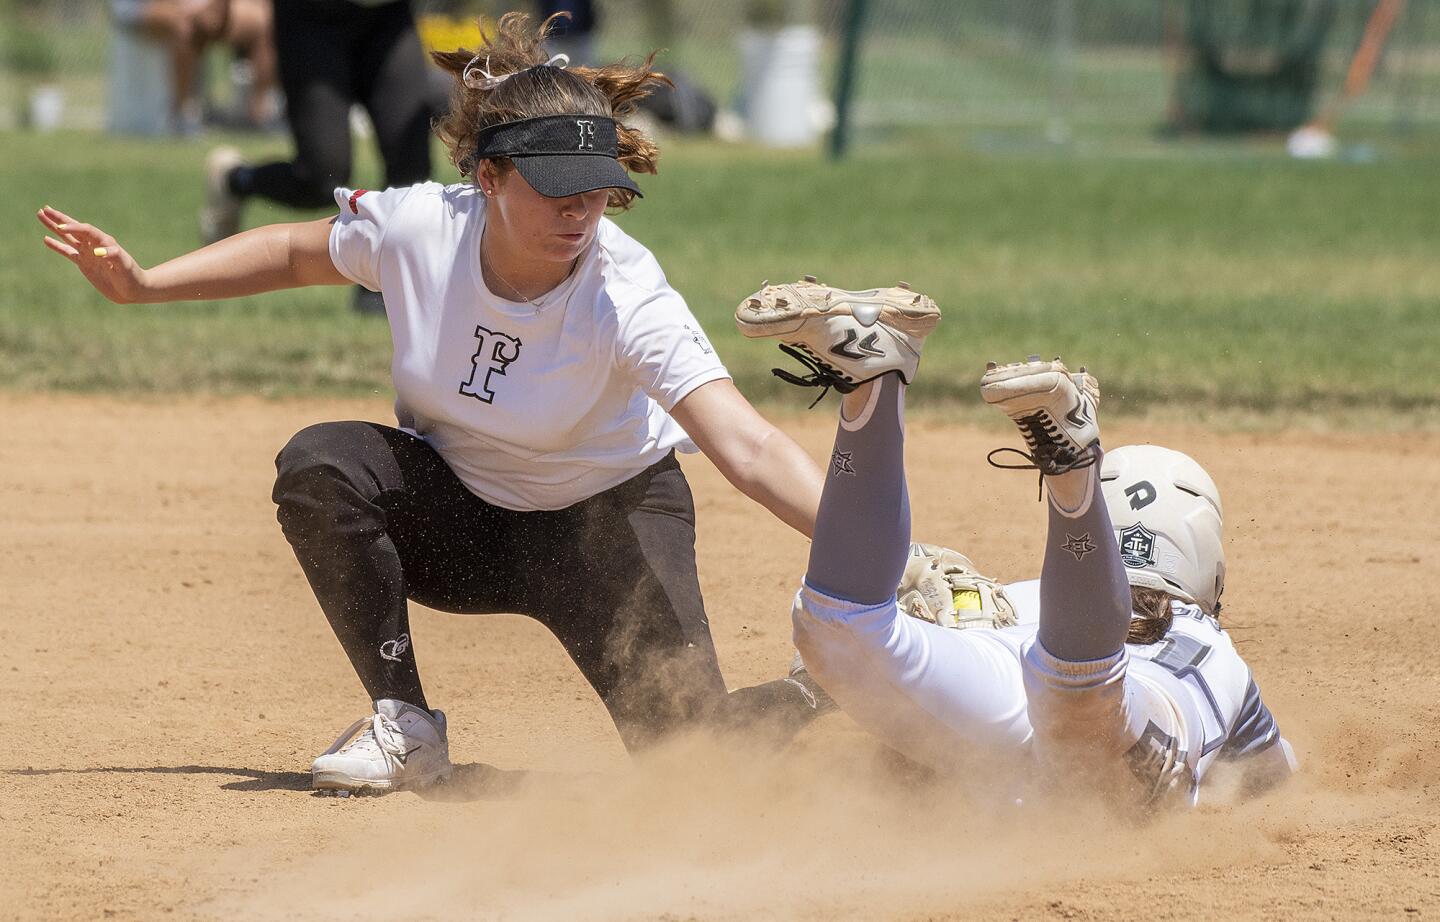 Lakewood Firecrackers's Izzy Pena tags out Texas Bombers's Lourdes Bacon in a 16U Premier softball game in the PGF Nationals in Fountain Valley on Wednesday, August 1.